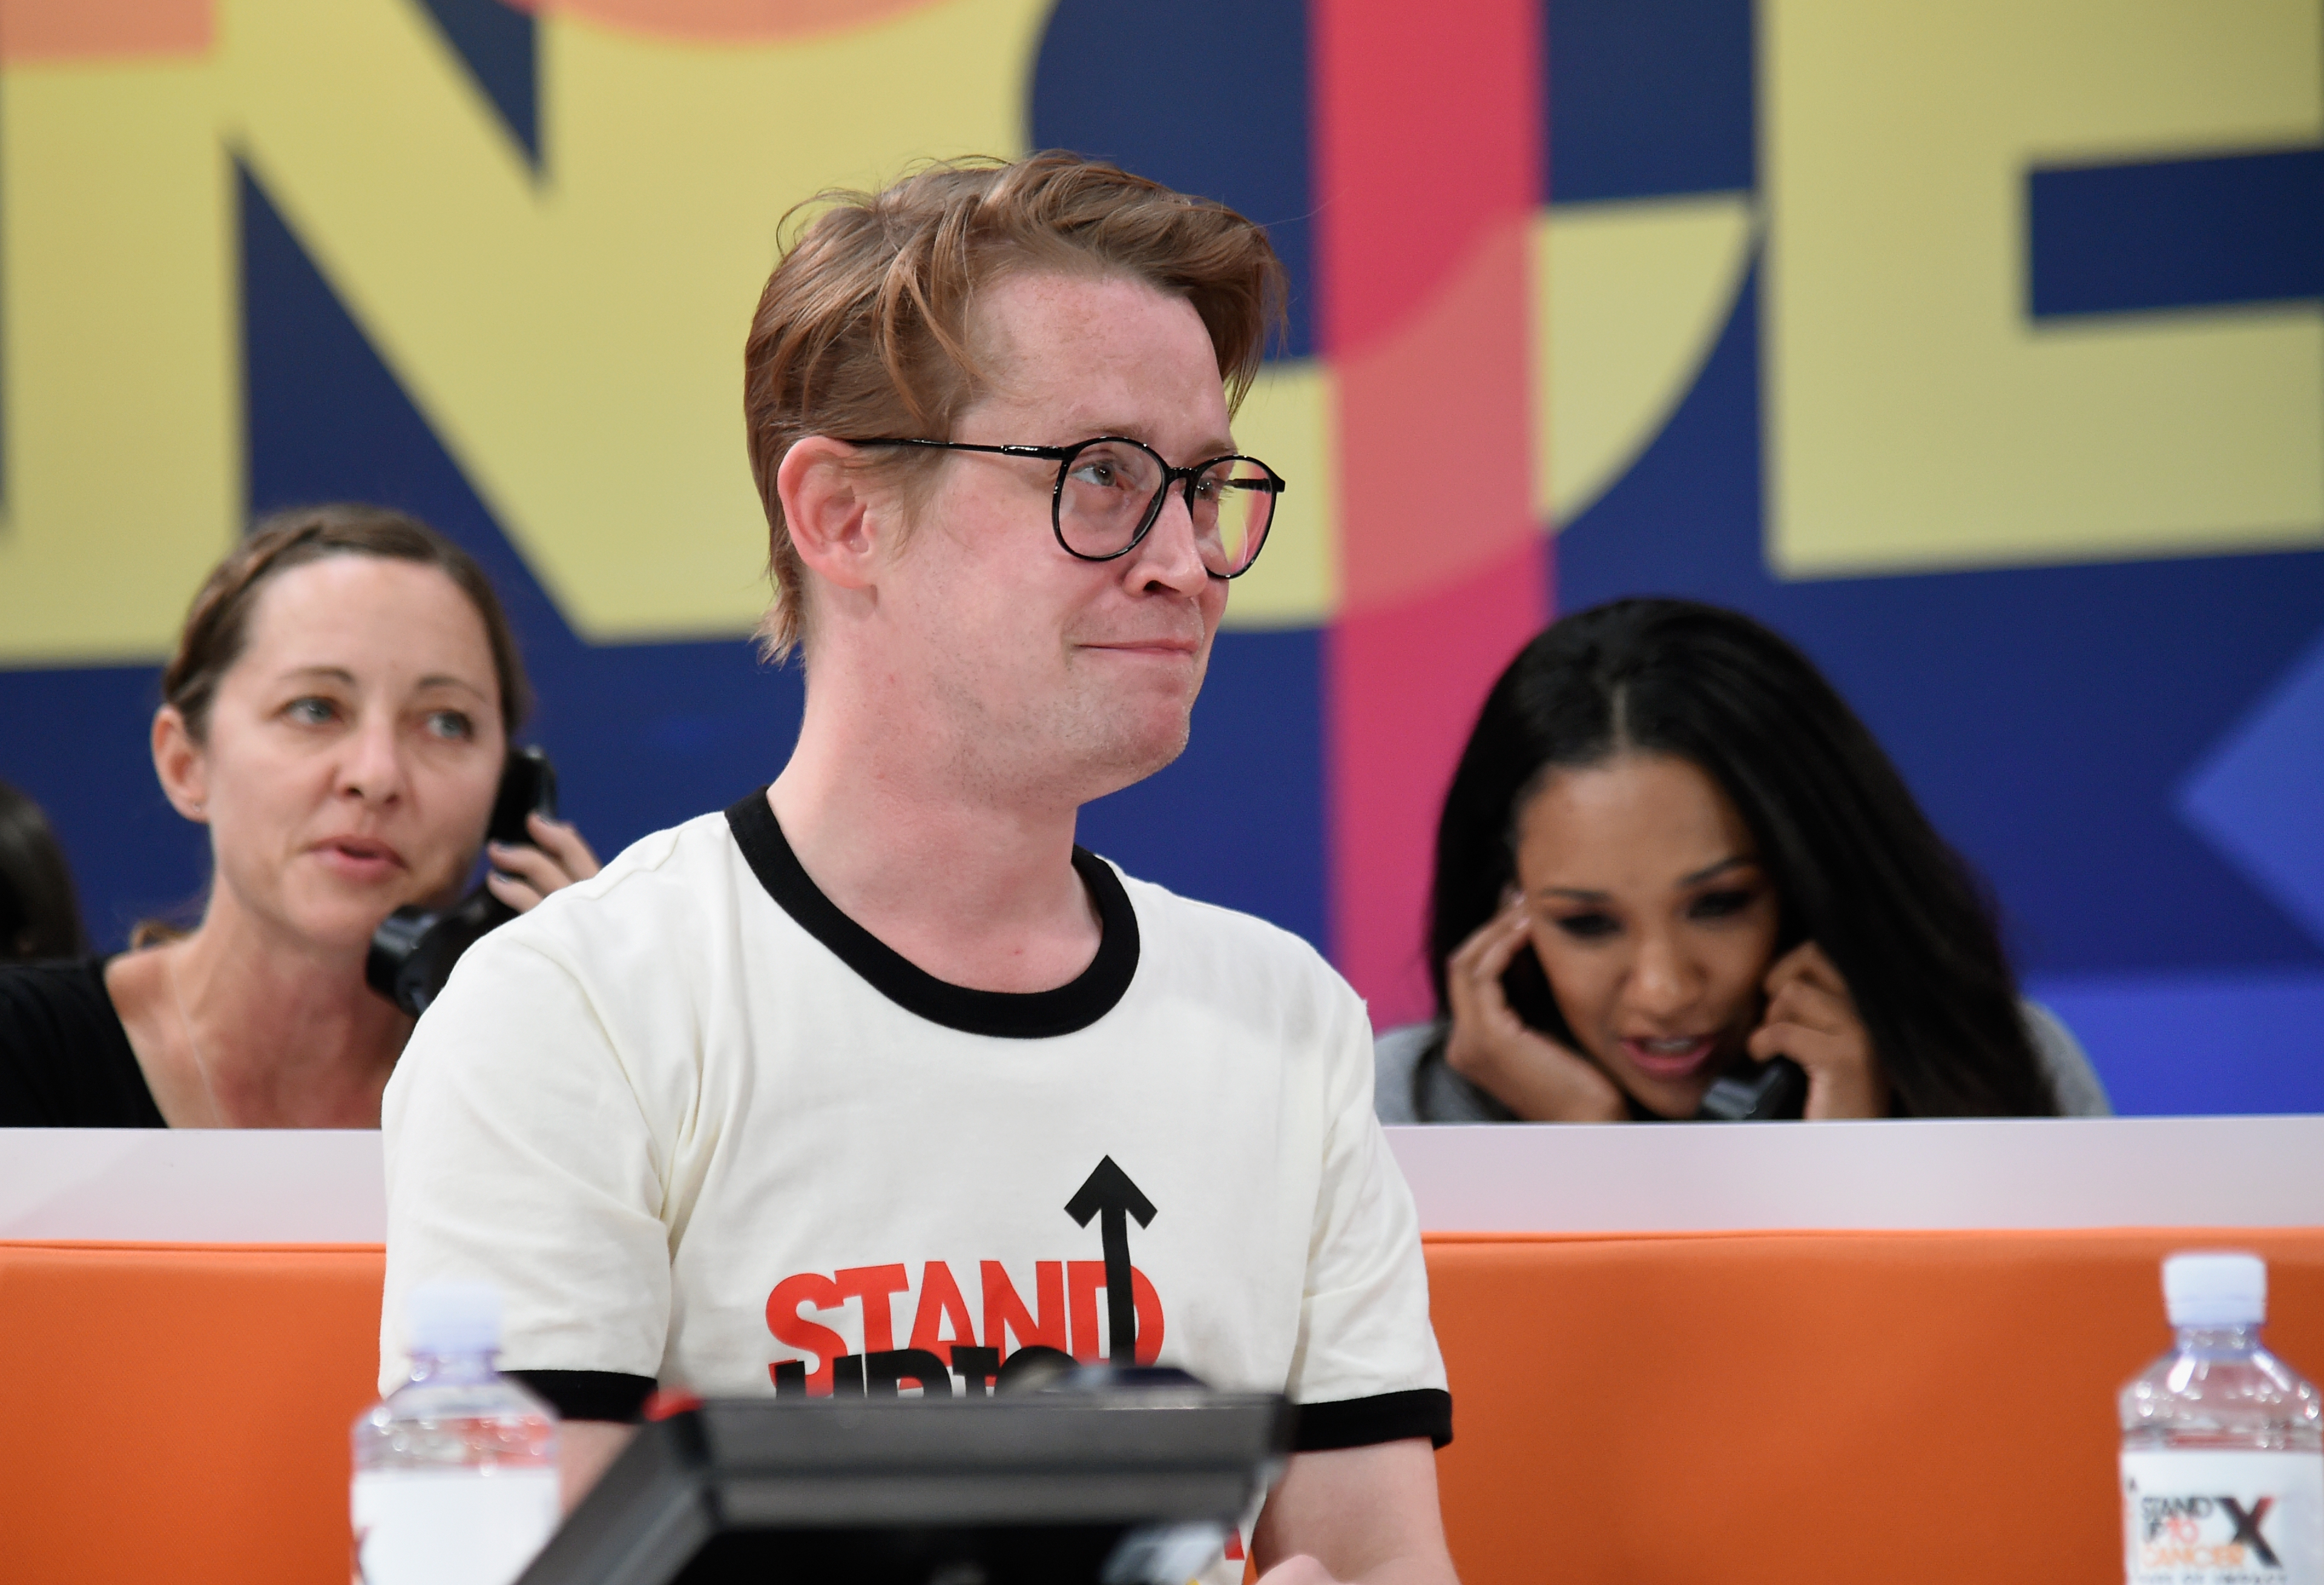 Macaulay Culkin at the sixth biennial Stand Up To Cancer (SU2C) telecast on September 7, 2018, in Santa Monica, California | Source: Getty Images